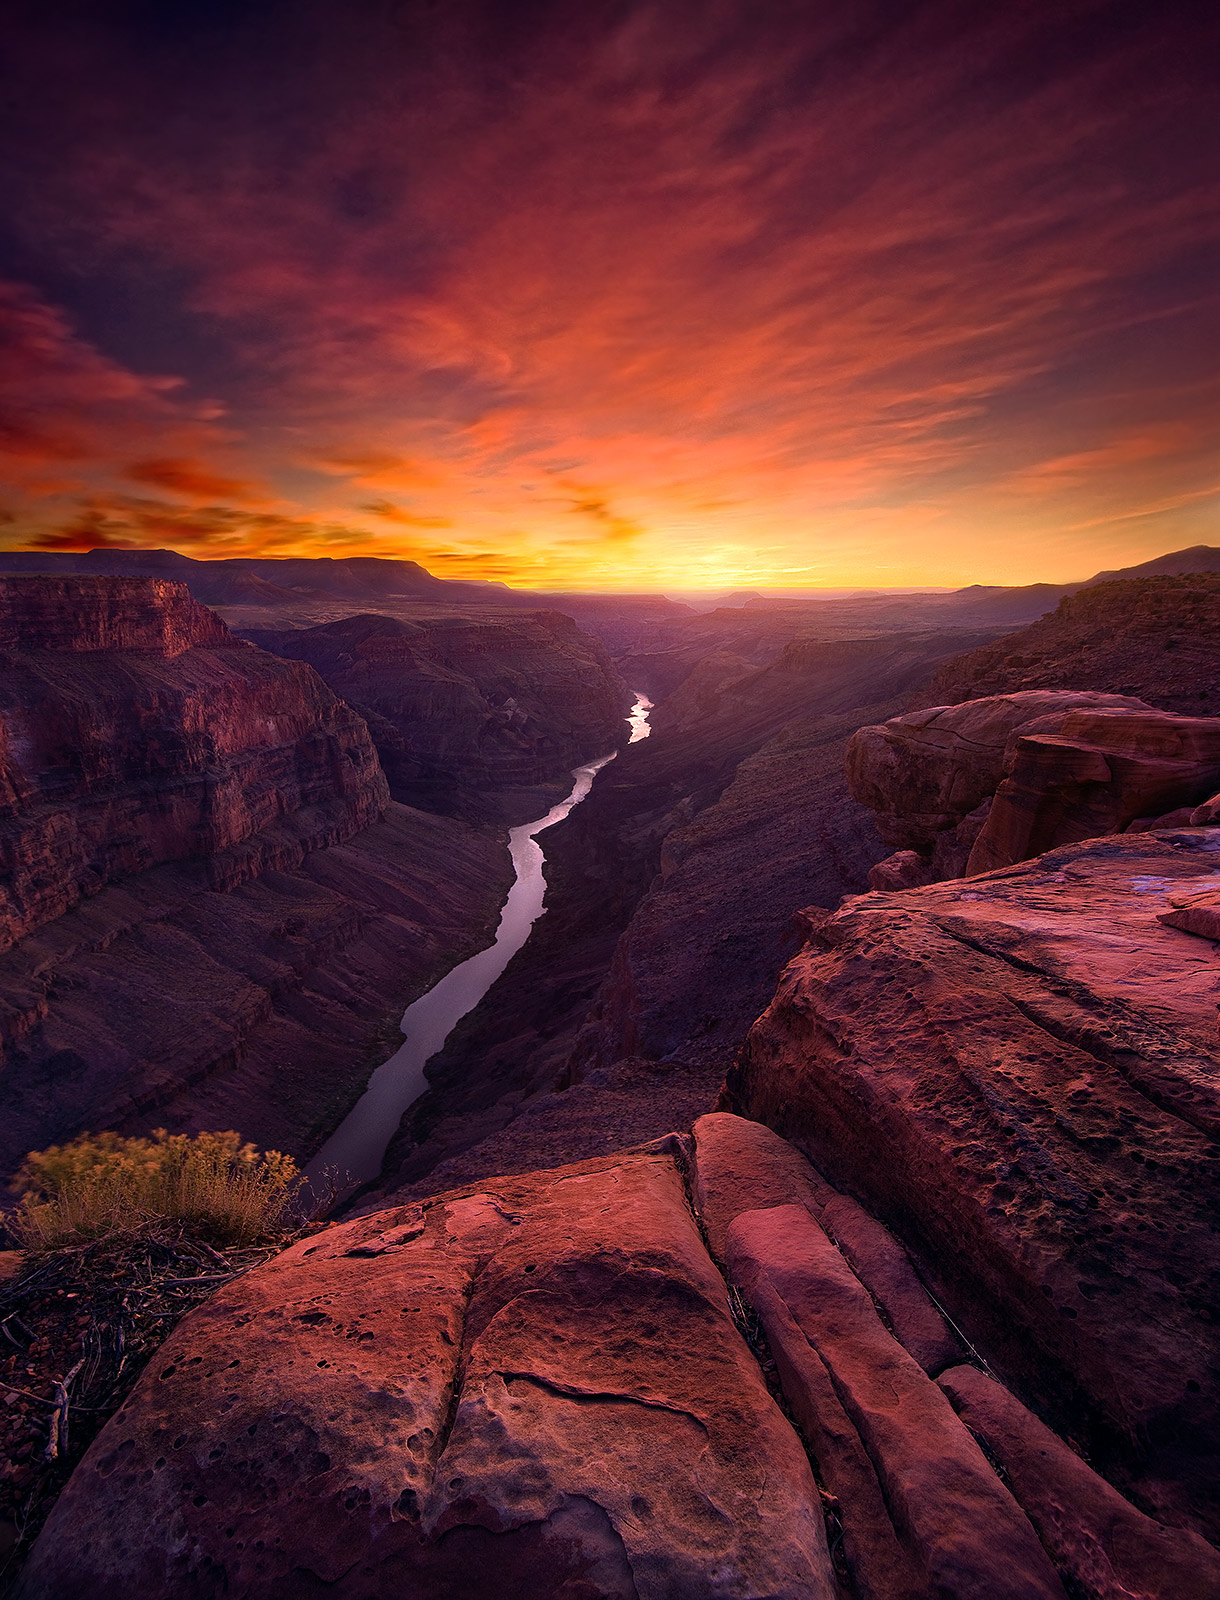 An immensely colorful sunset sky and light reflected over Toroweep at the Grand Canyon, Arizona.